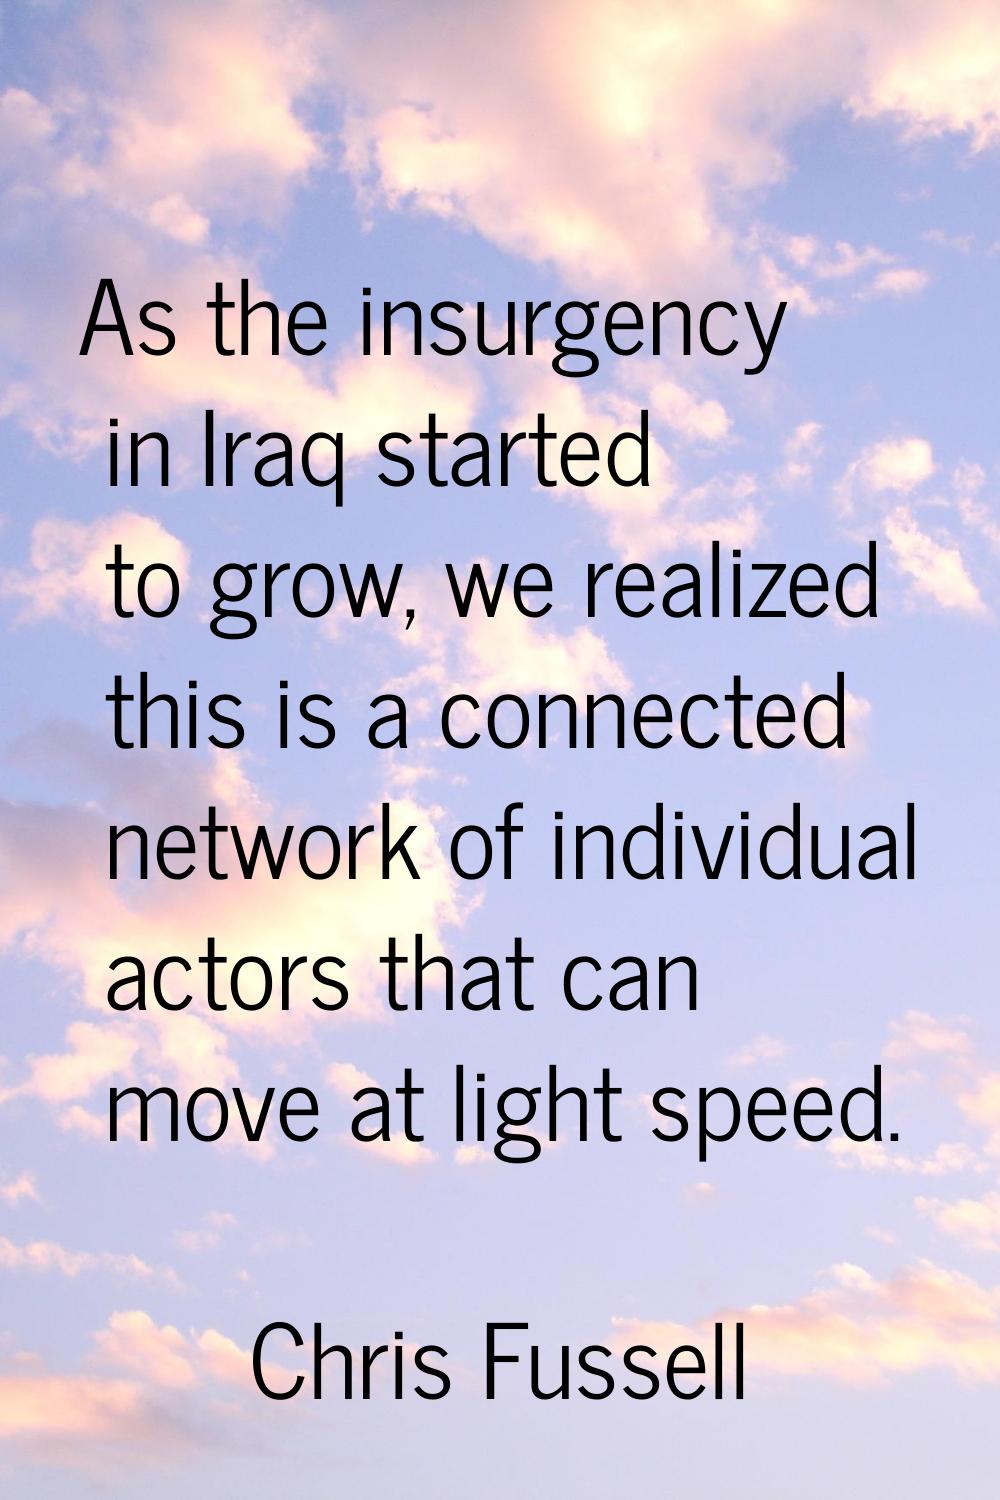 As the insurgency in Iraq started to grow, we realized this is a connected network of individual ac